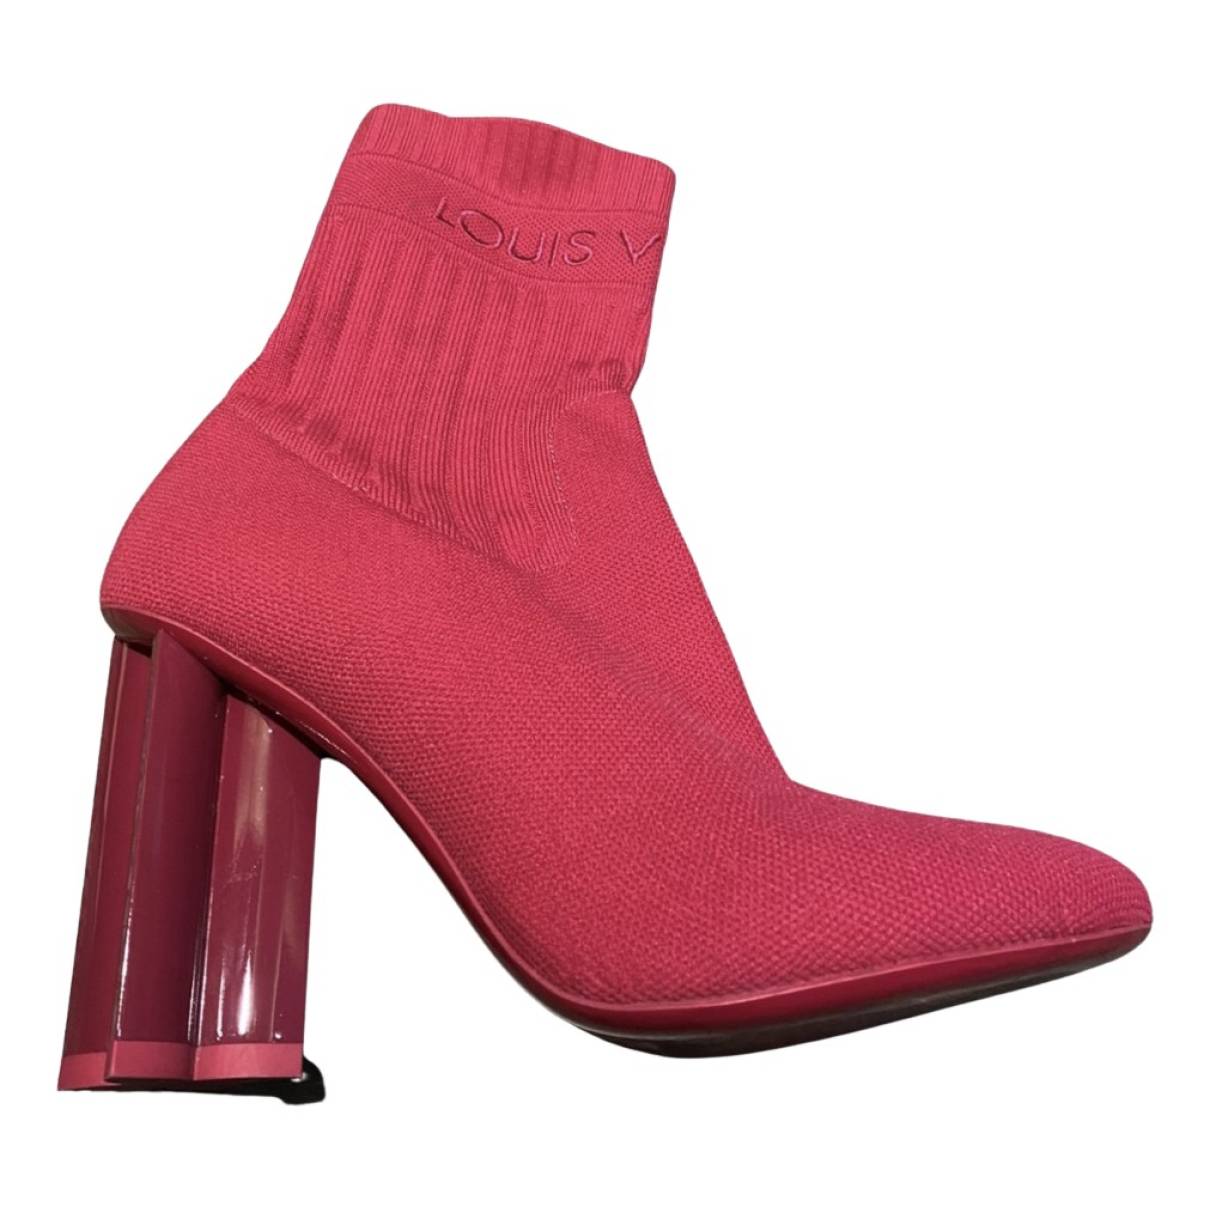 Cloth ankle boots Louis Vuitton Pink size 37 EU in Cloth - 29947286